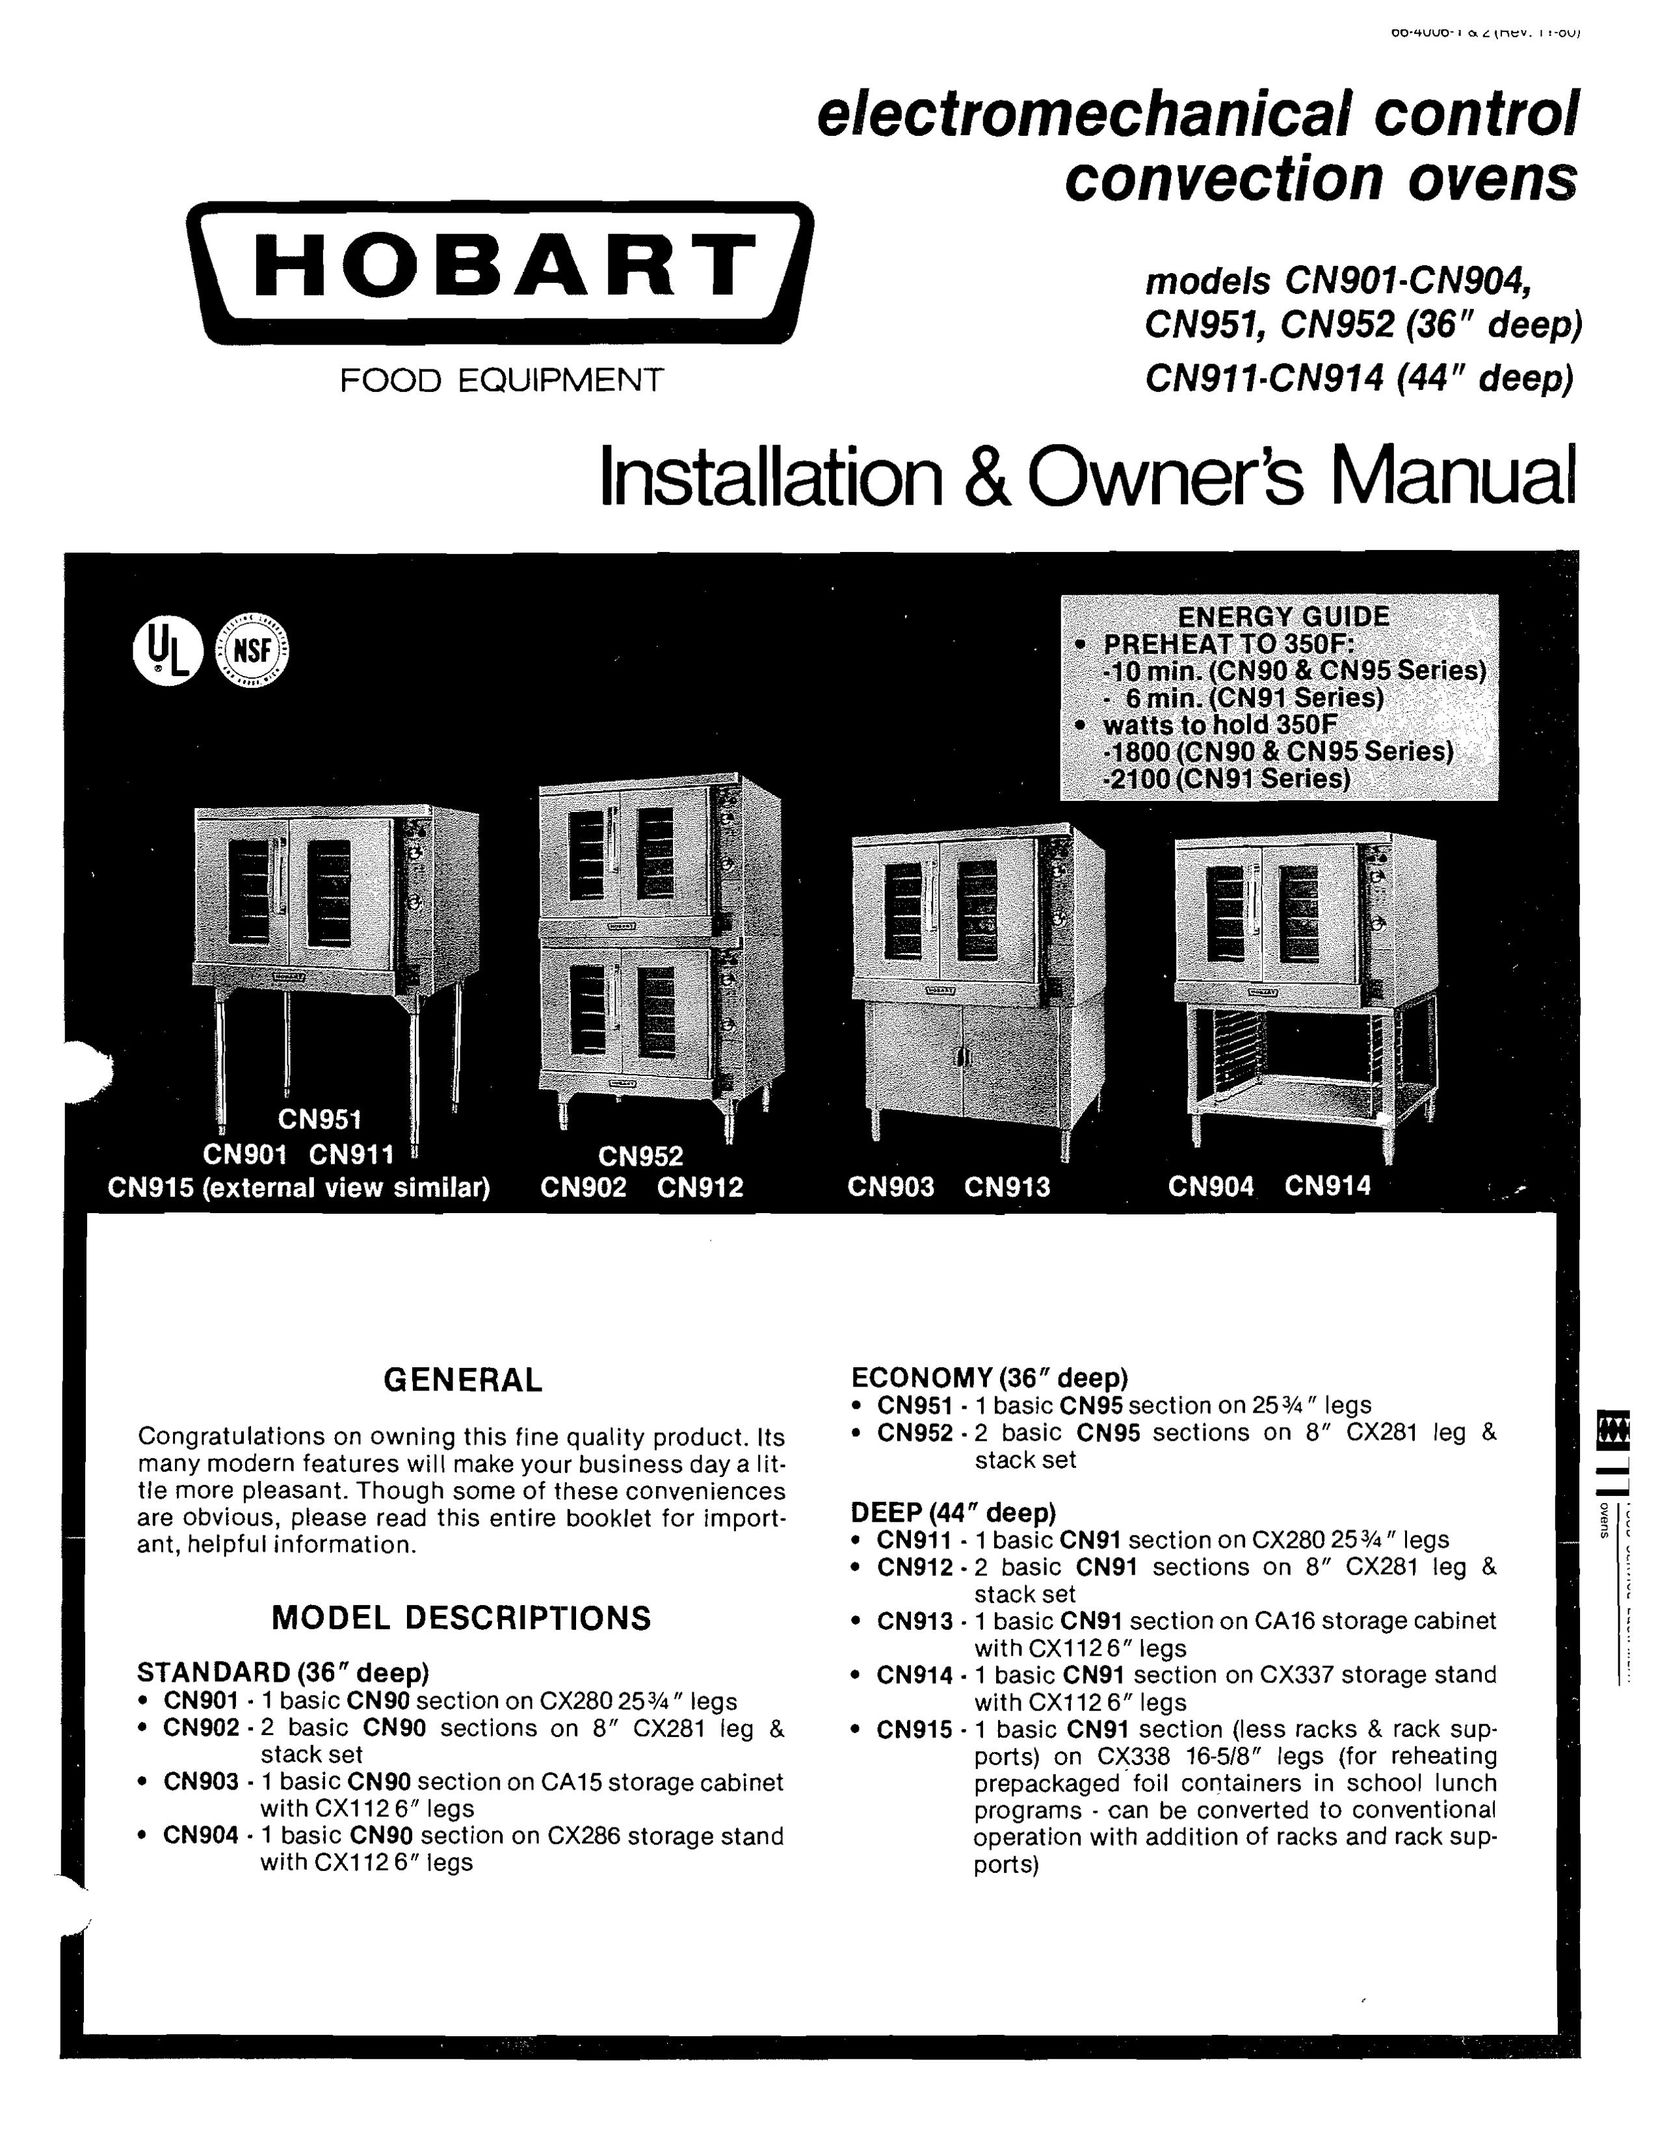 Hobart CN911-CN914 Convection Oven User Manual